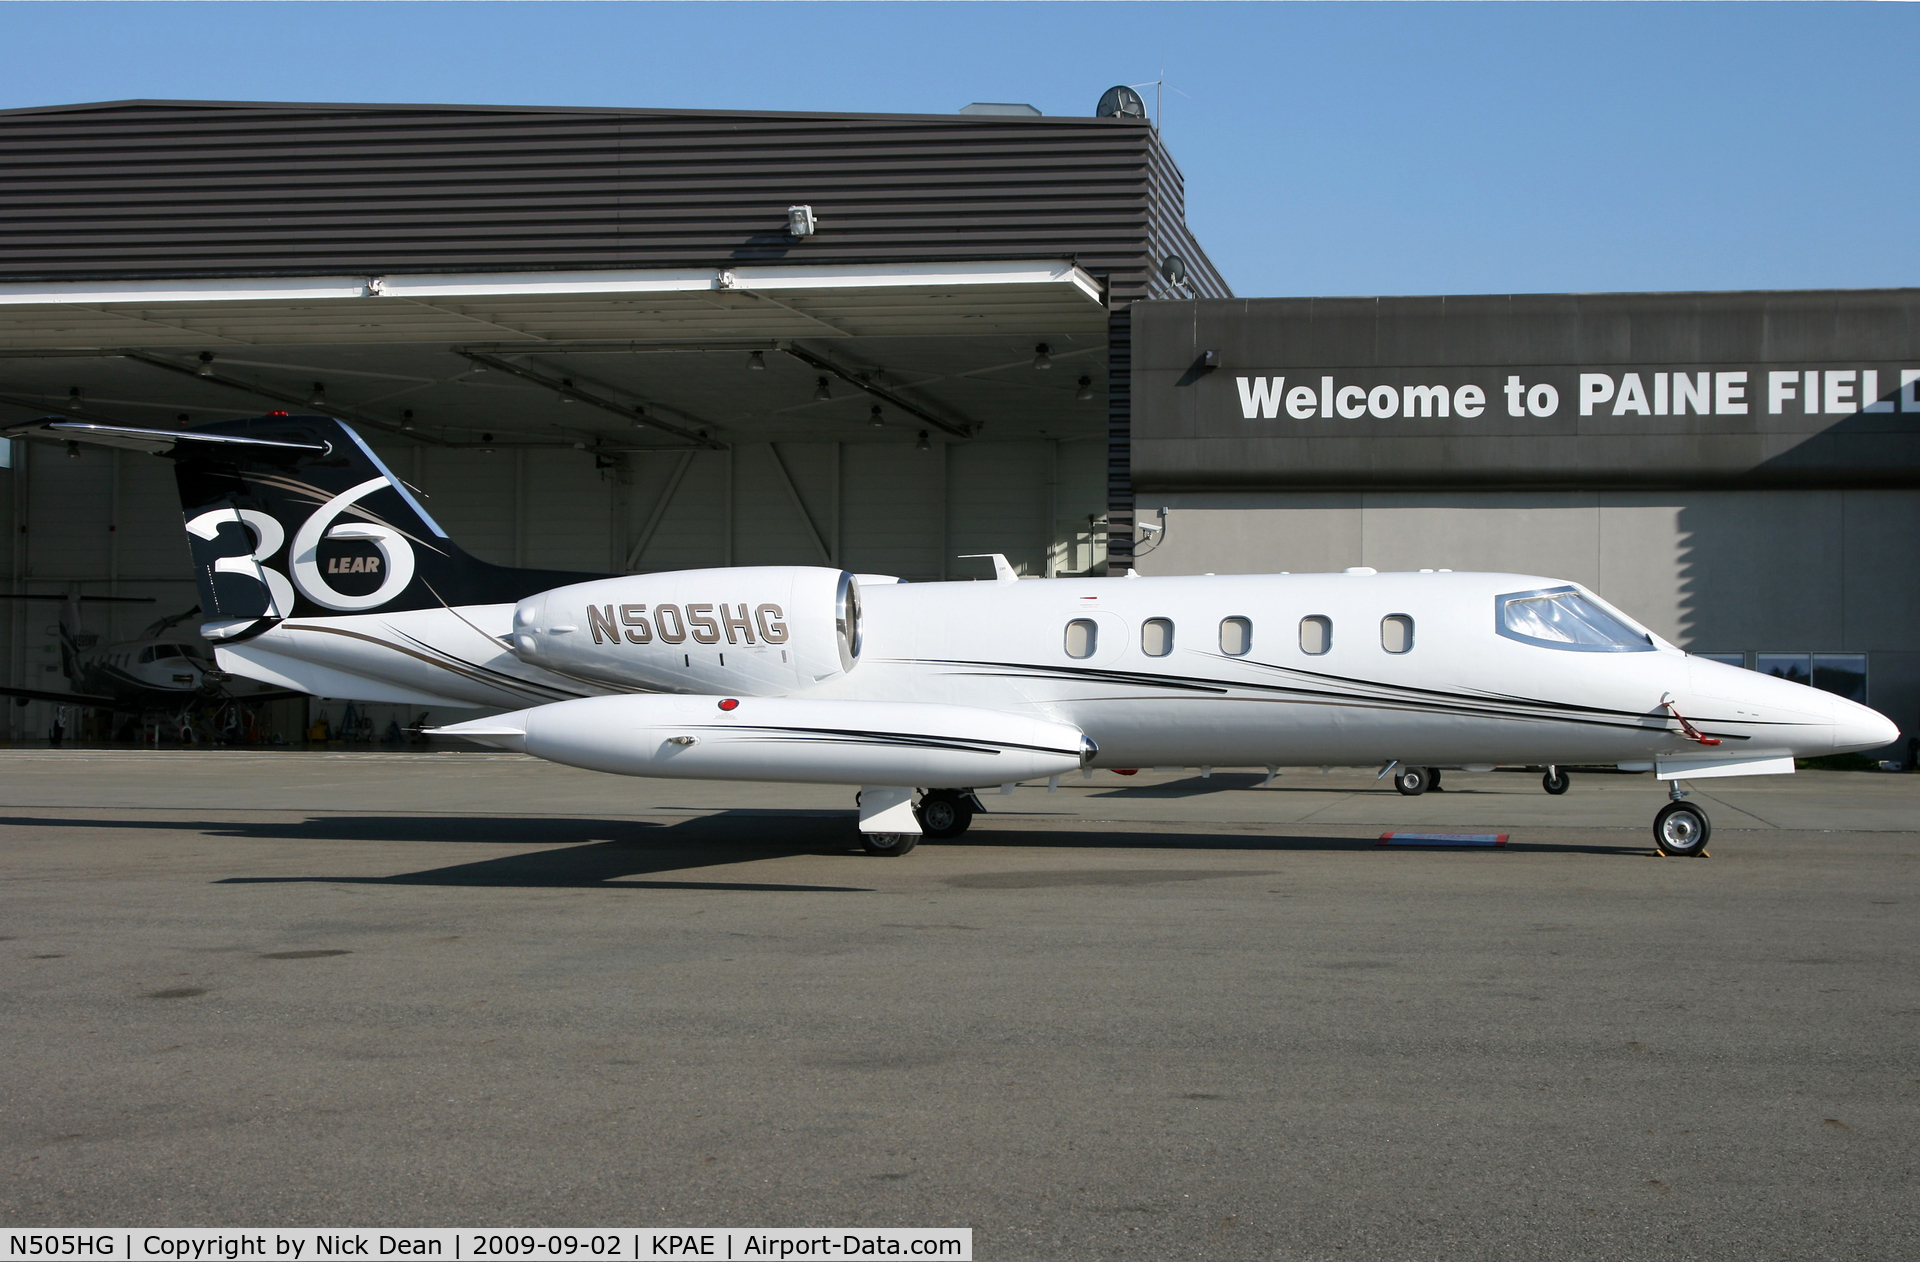 N505HG, 1975 Gates Learjet 36 C/N 009, KPAE Nice new scheme on this frame compared to the previous upload.